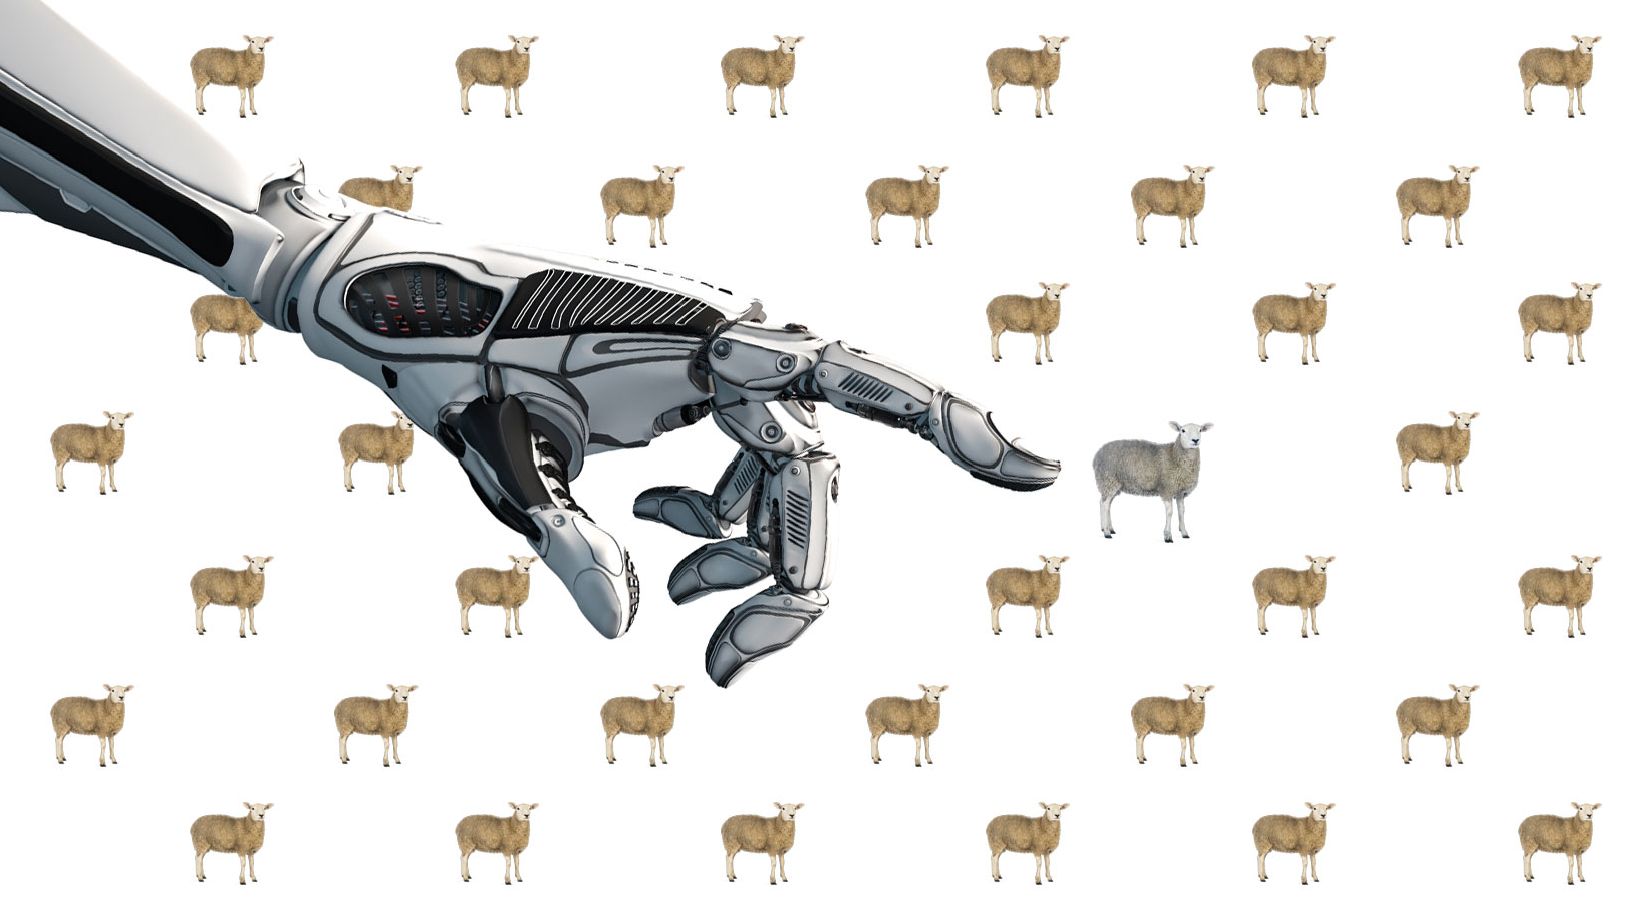 A robot hand points to the "black sheep" amongst all the other sheeps.